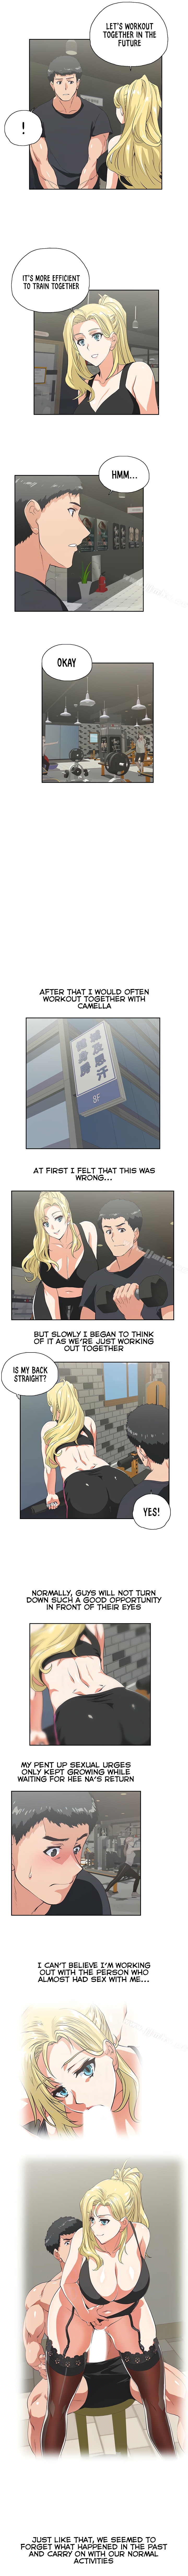 Up and Down - Chapter 71 Page 5